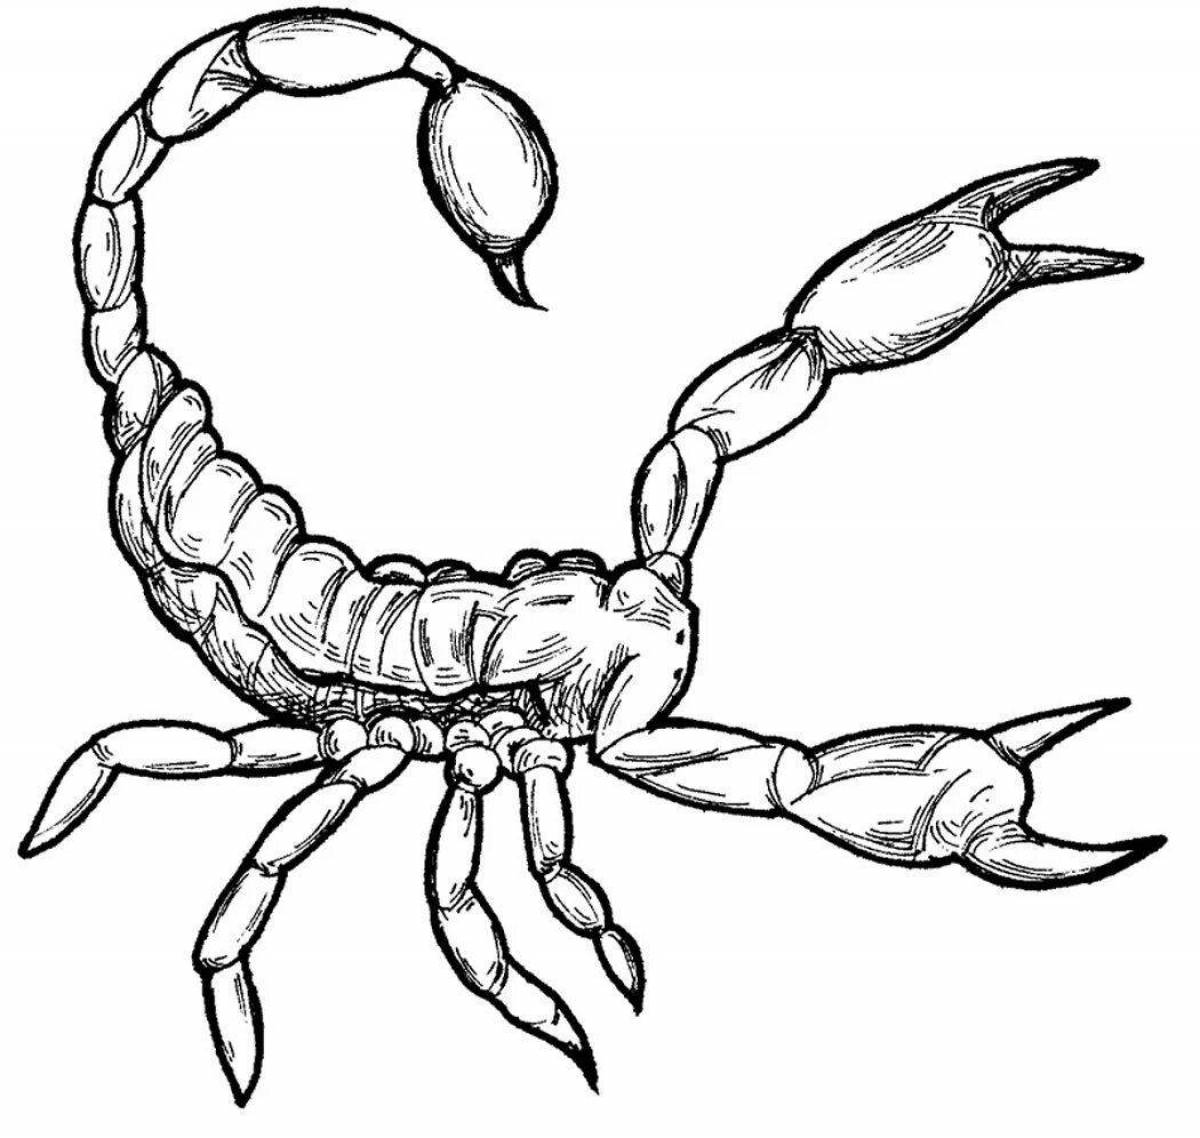 Adorable scorpion coloring book for kids